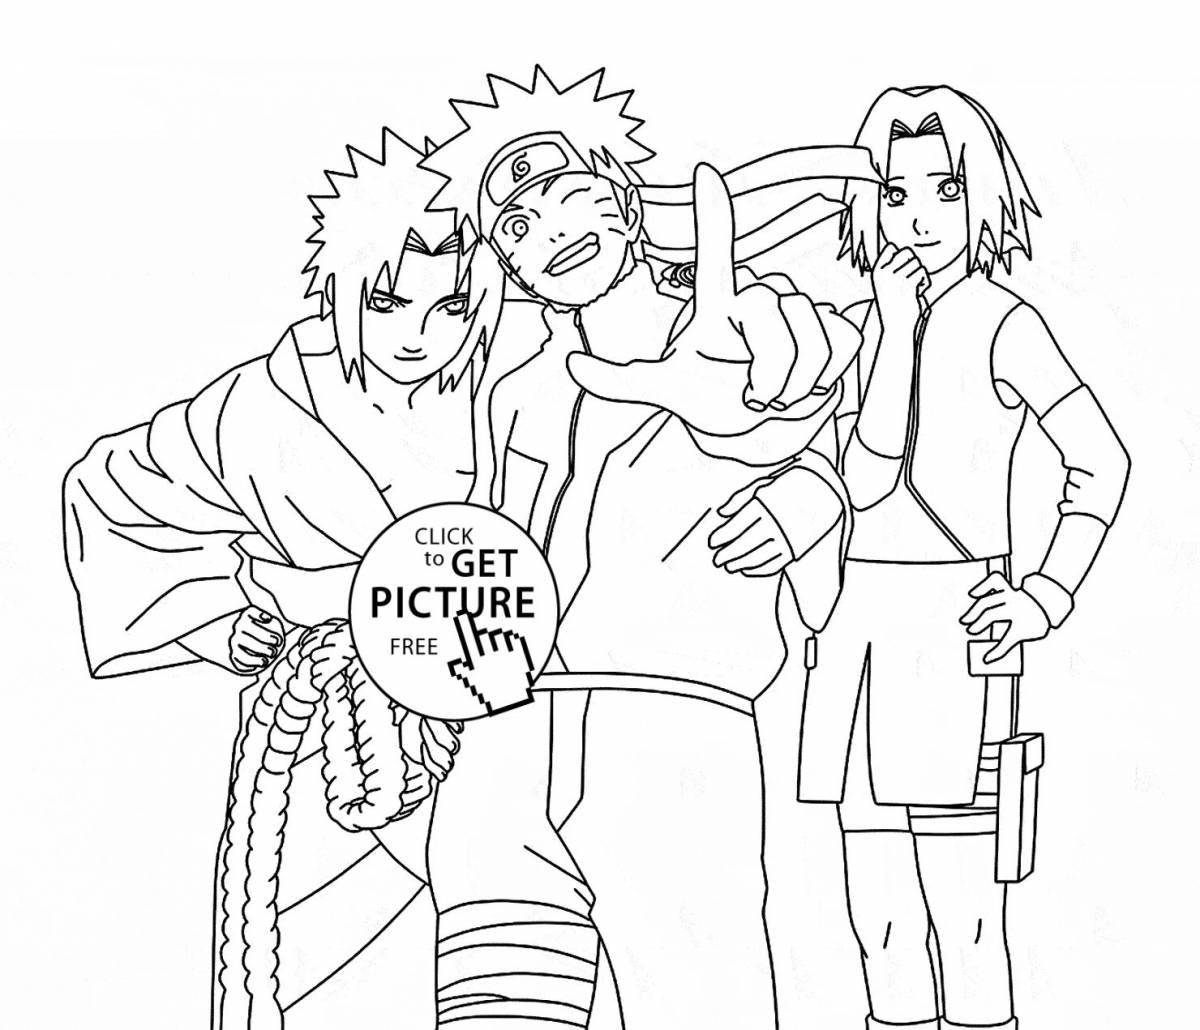 Sparkling naruto coloring page for girls